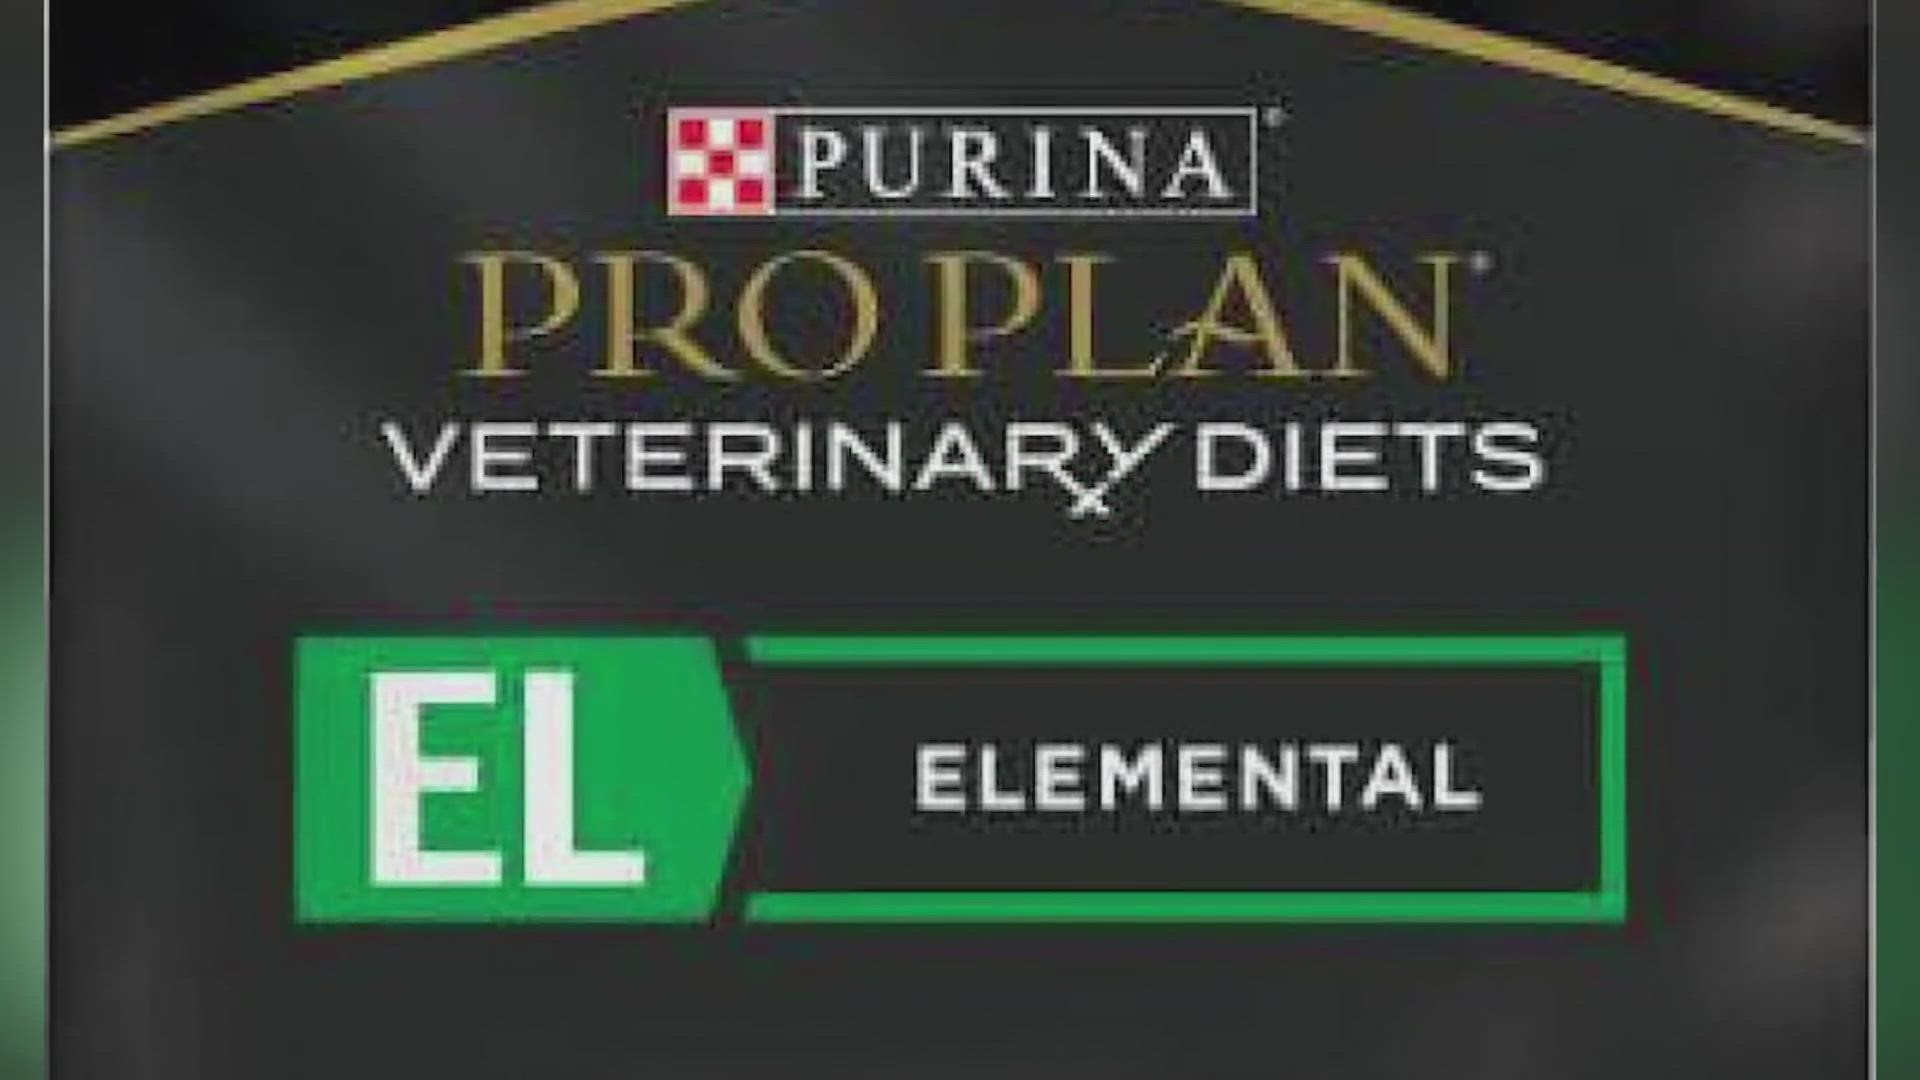 Purina says they have received two contacts about two separate confirmed cases of a dog exhibiting signs of vitamin D toxicity after eating the food.